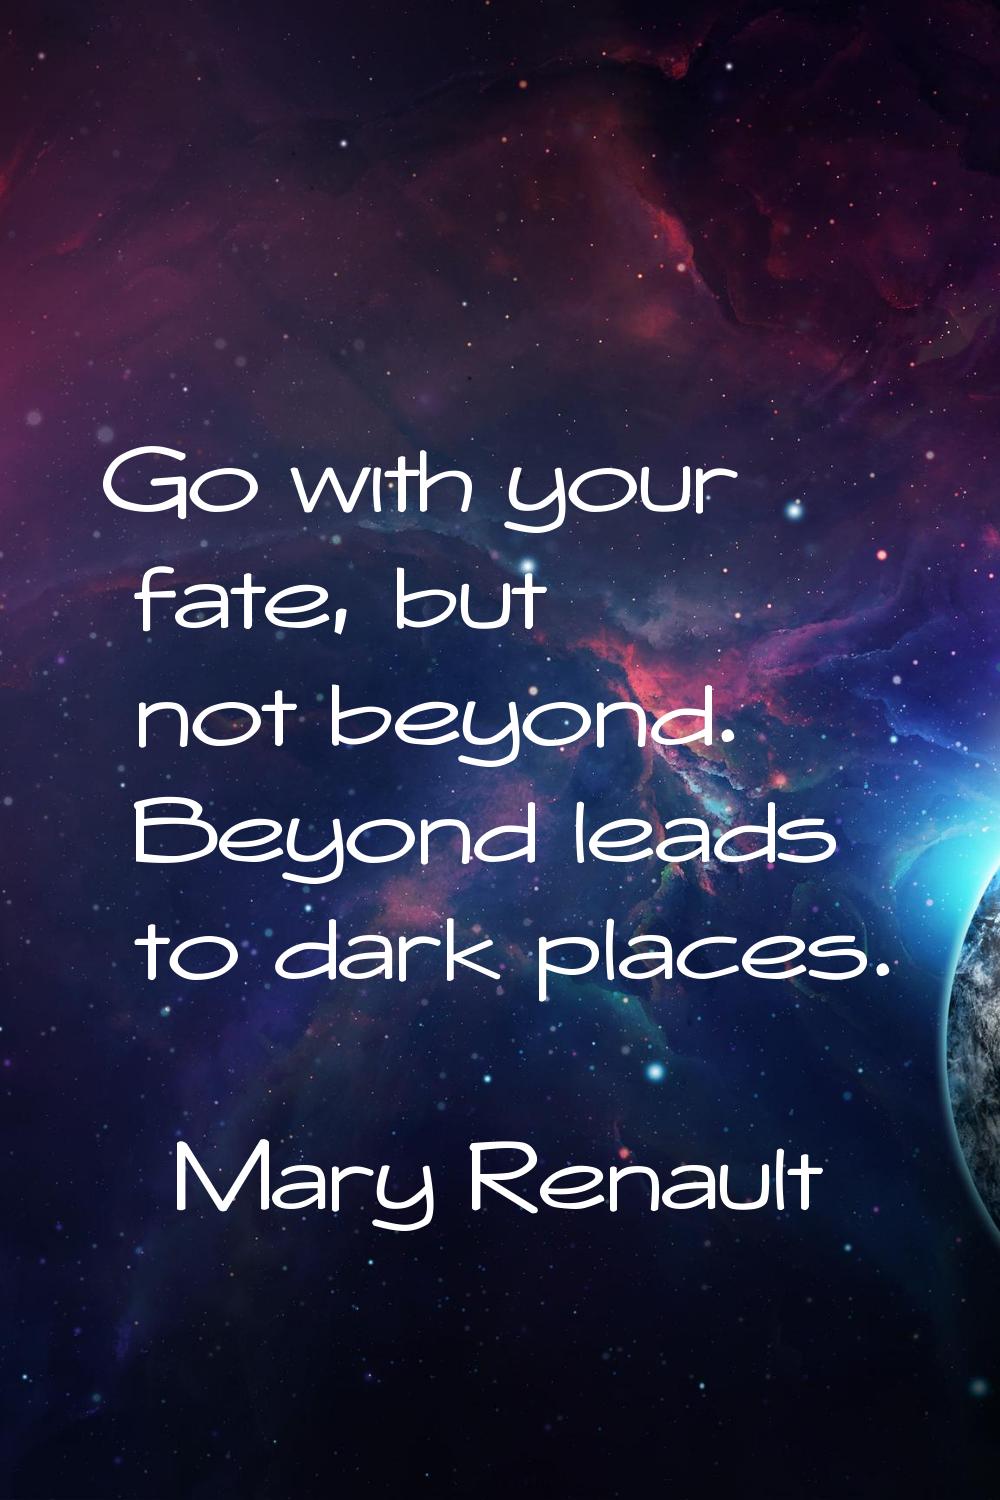 Go with your fate, but not beyond. Beyond leads to dark places.